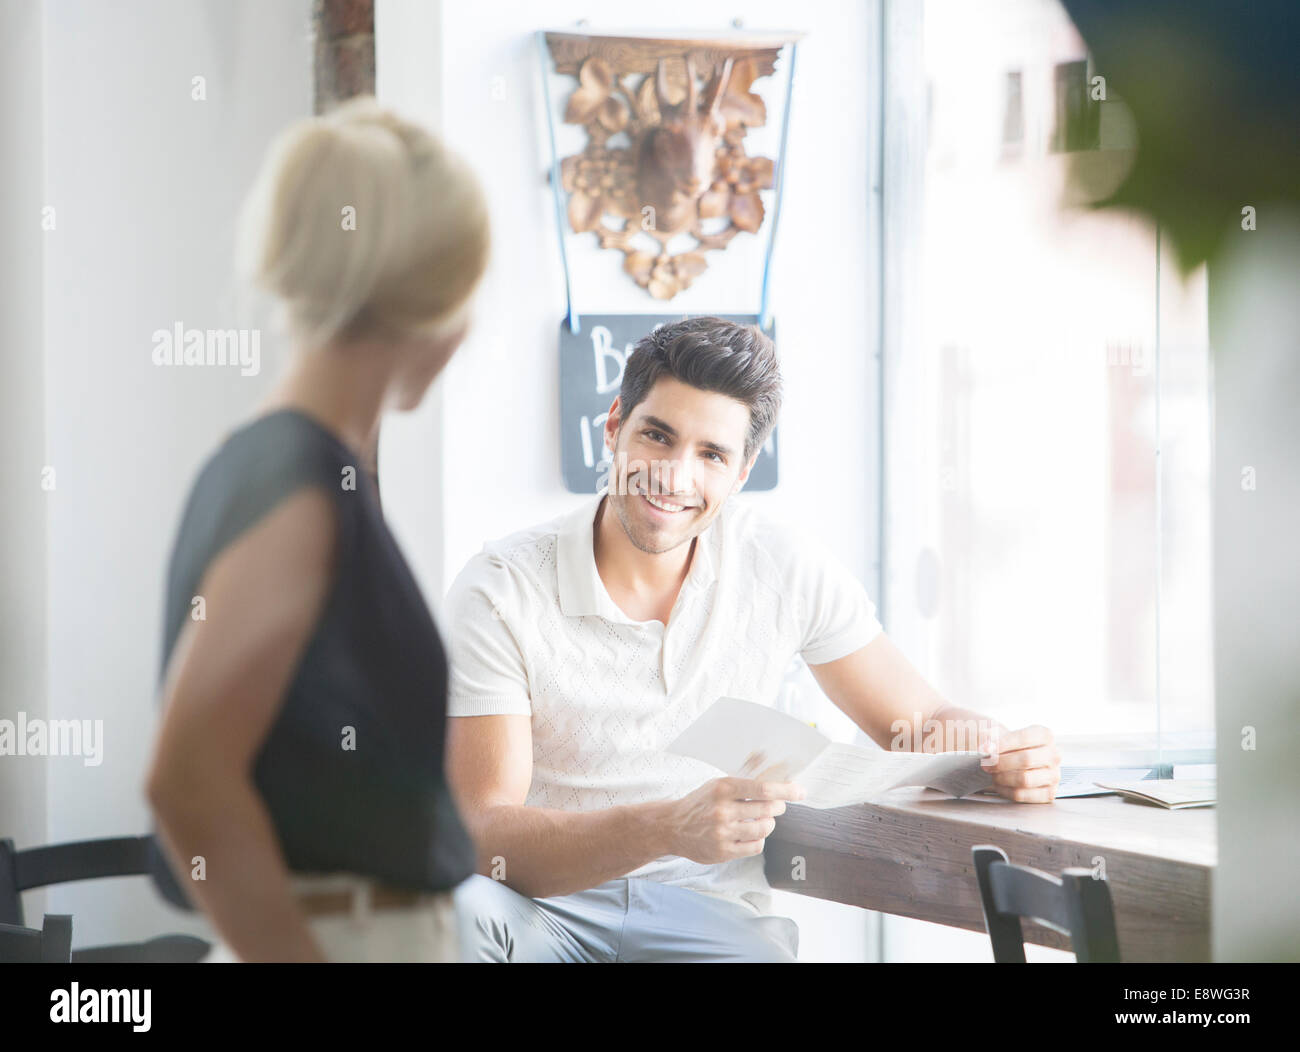 Man ordering from waitress talking in cafe Stock Photo